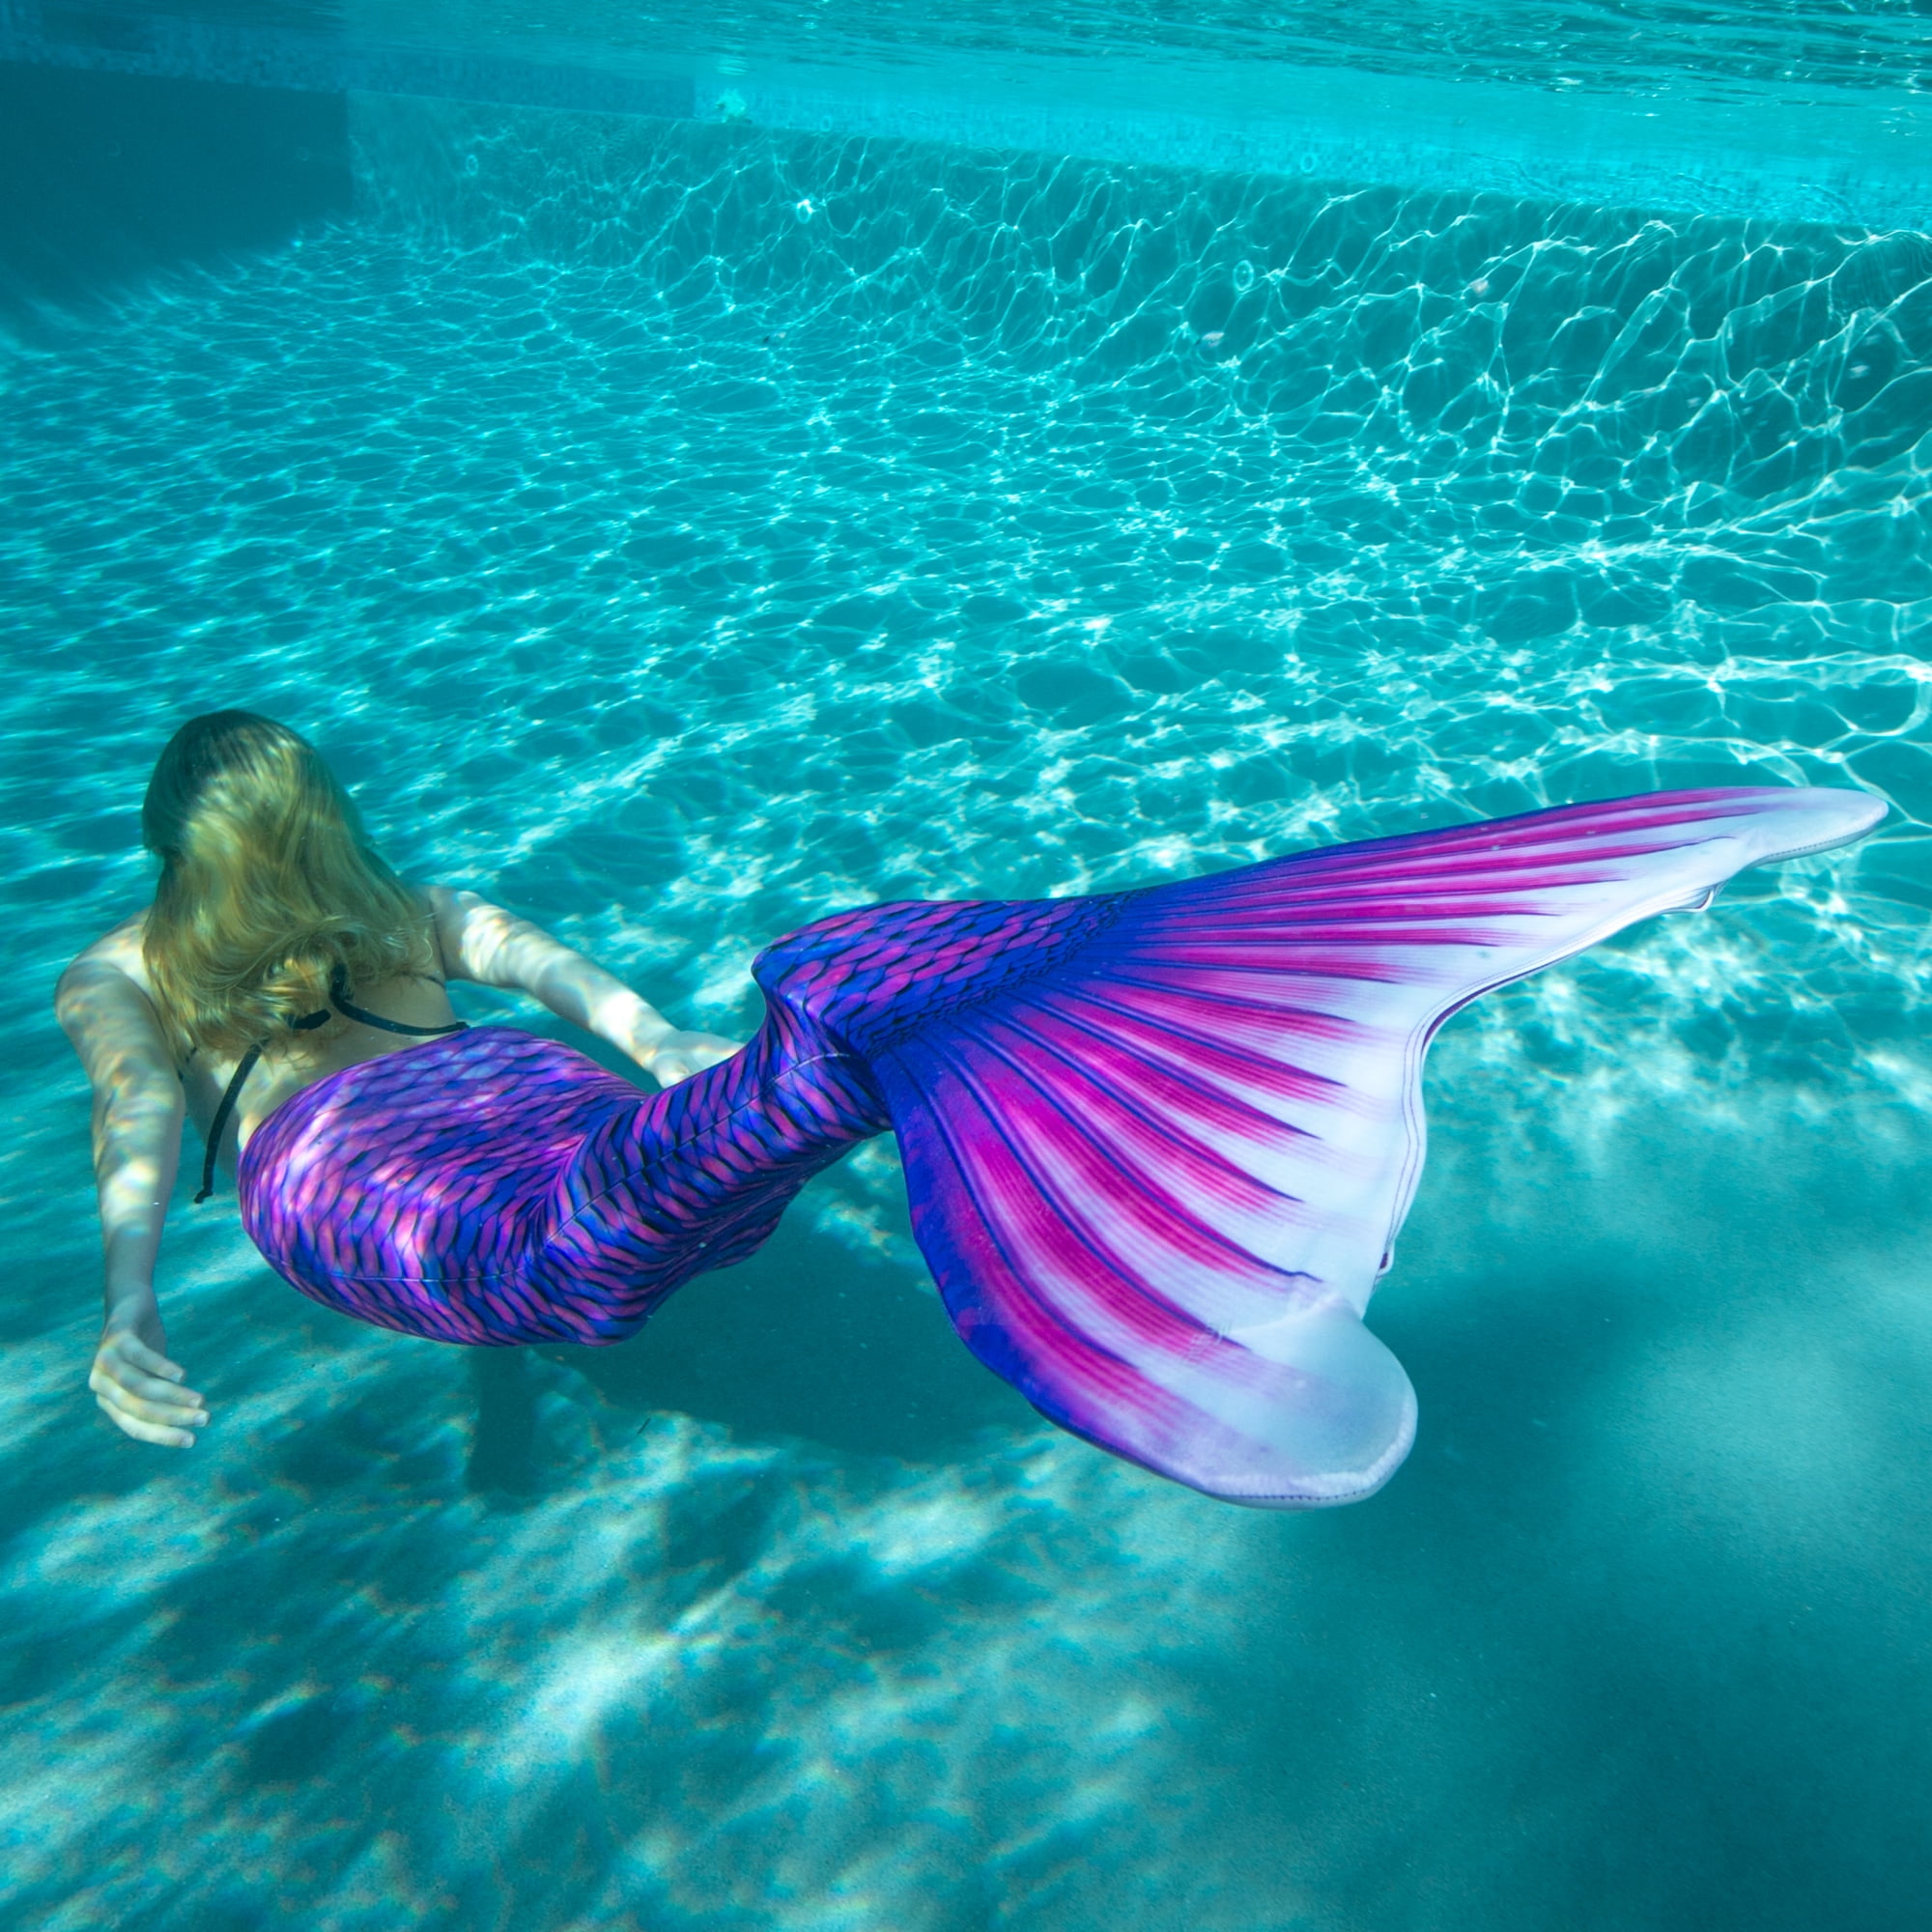  Fin Fun Mermaidens - Mermaid Tails for Swimming for Girls and  Kids with Monofin, 6, Artic Blue : Clothing, Shoes & Jewelry